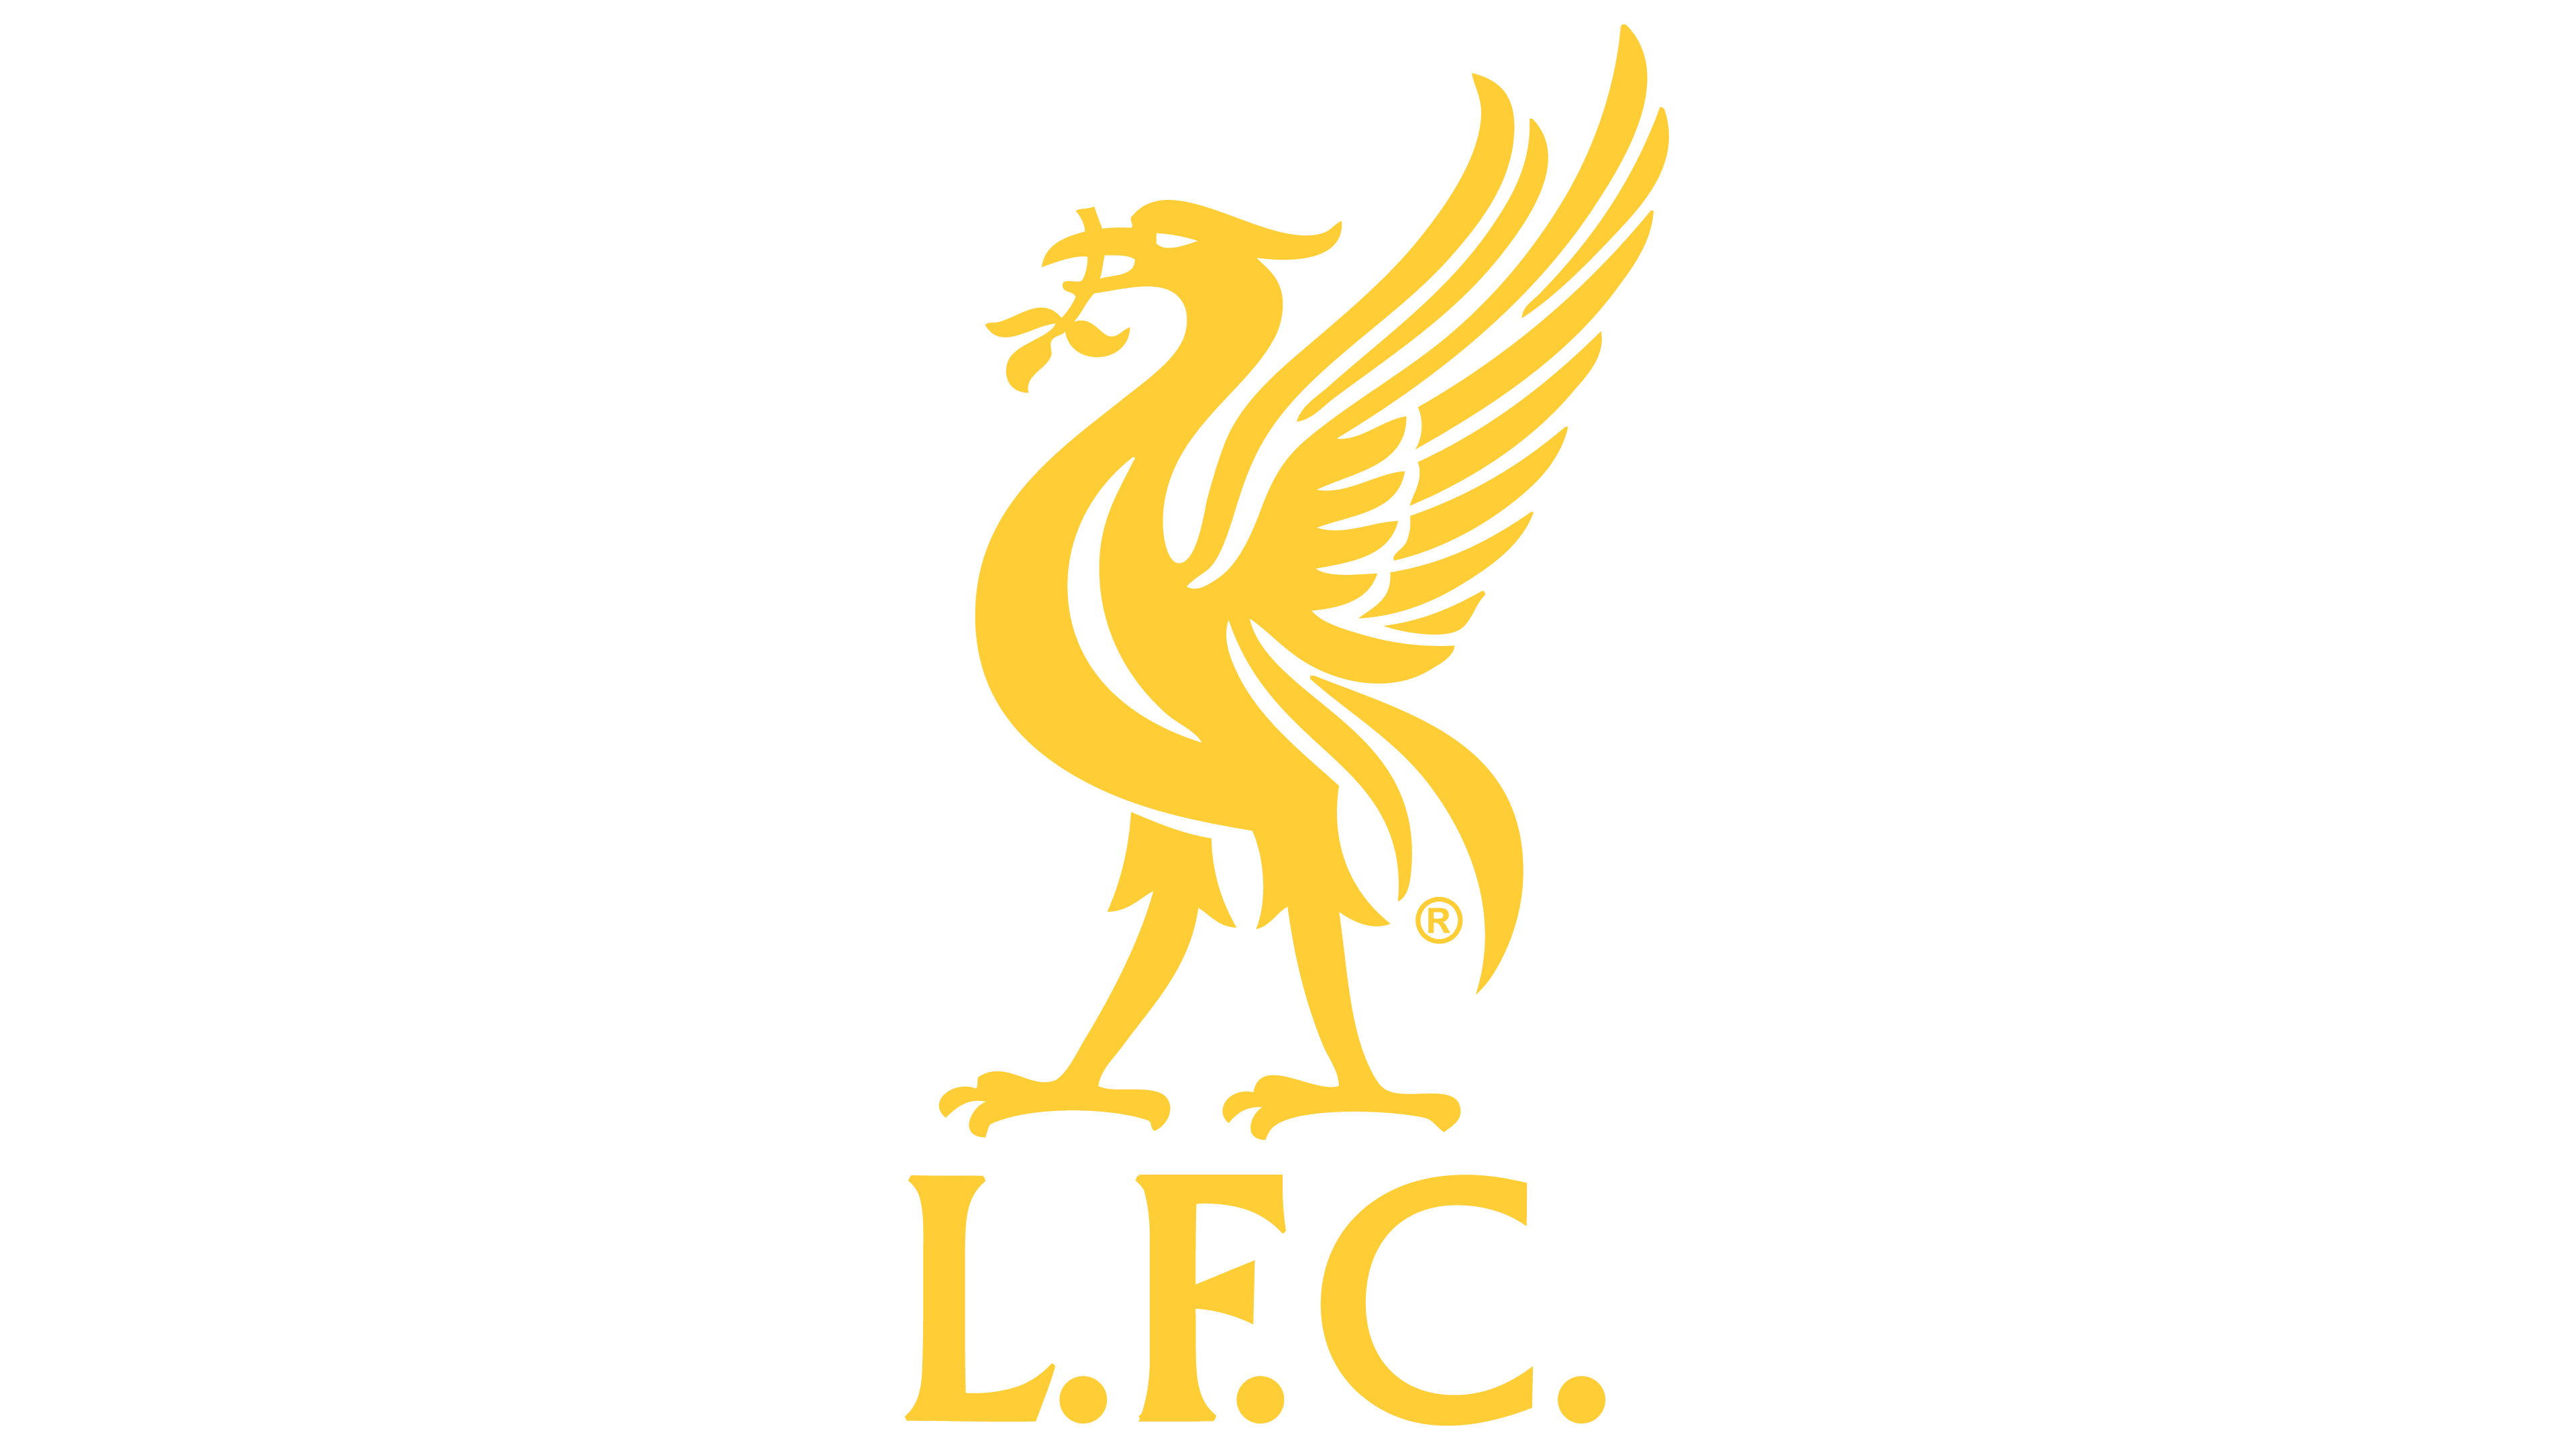 Liverpool Logo History The Most Famous Brands And Company Logos In The World